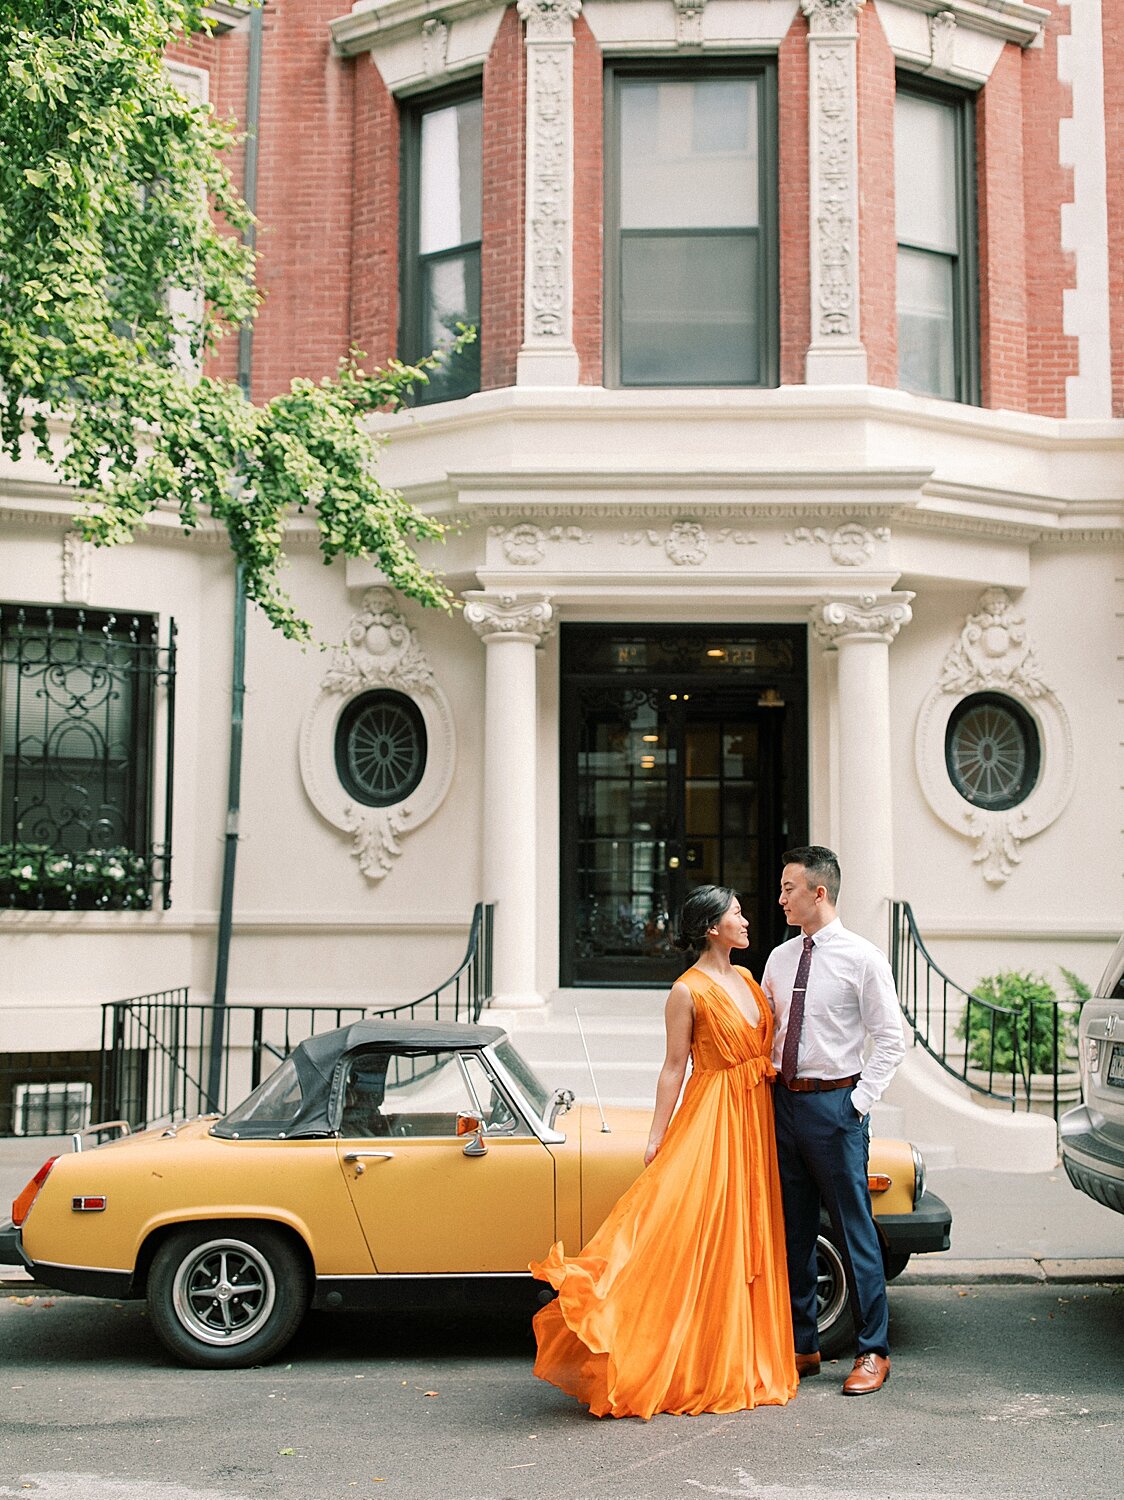 Upper East Side street portraits by Asher Gardner Photography